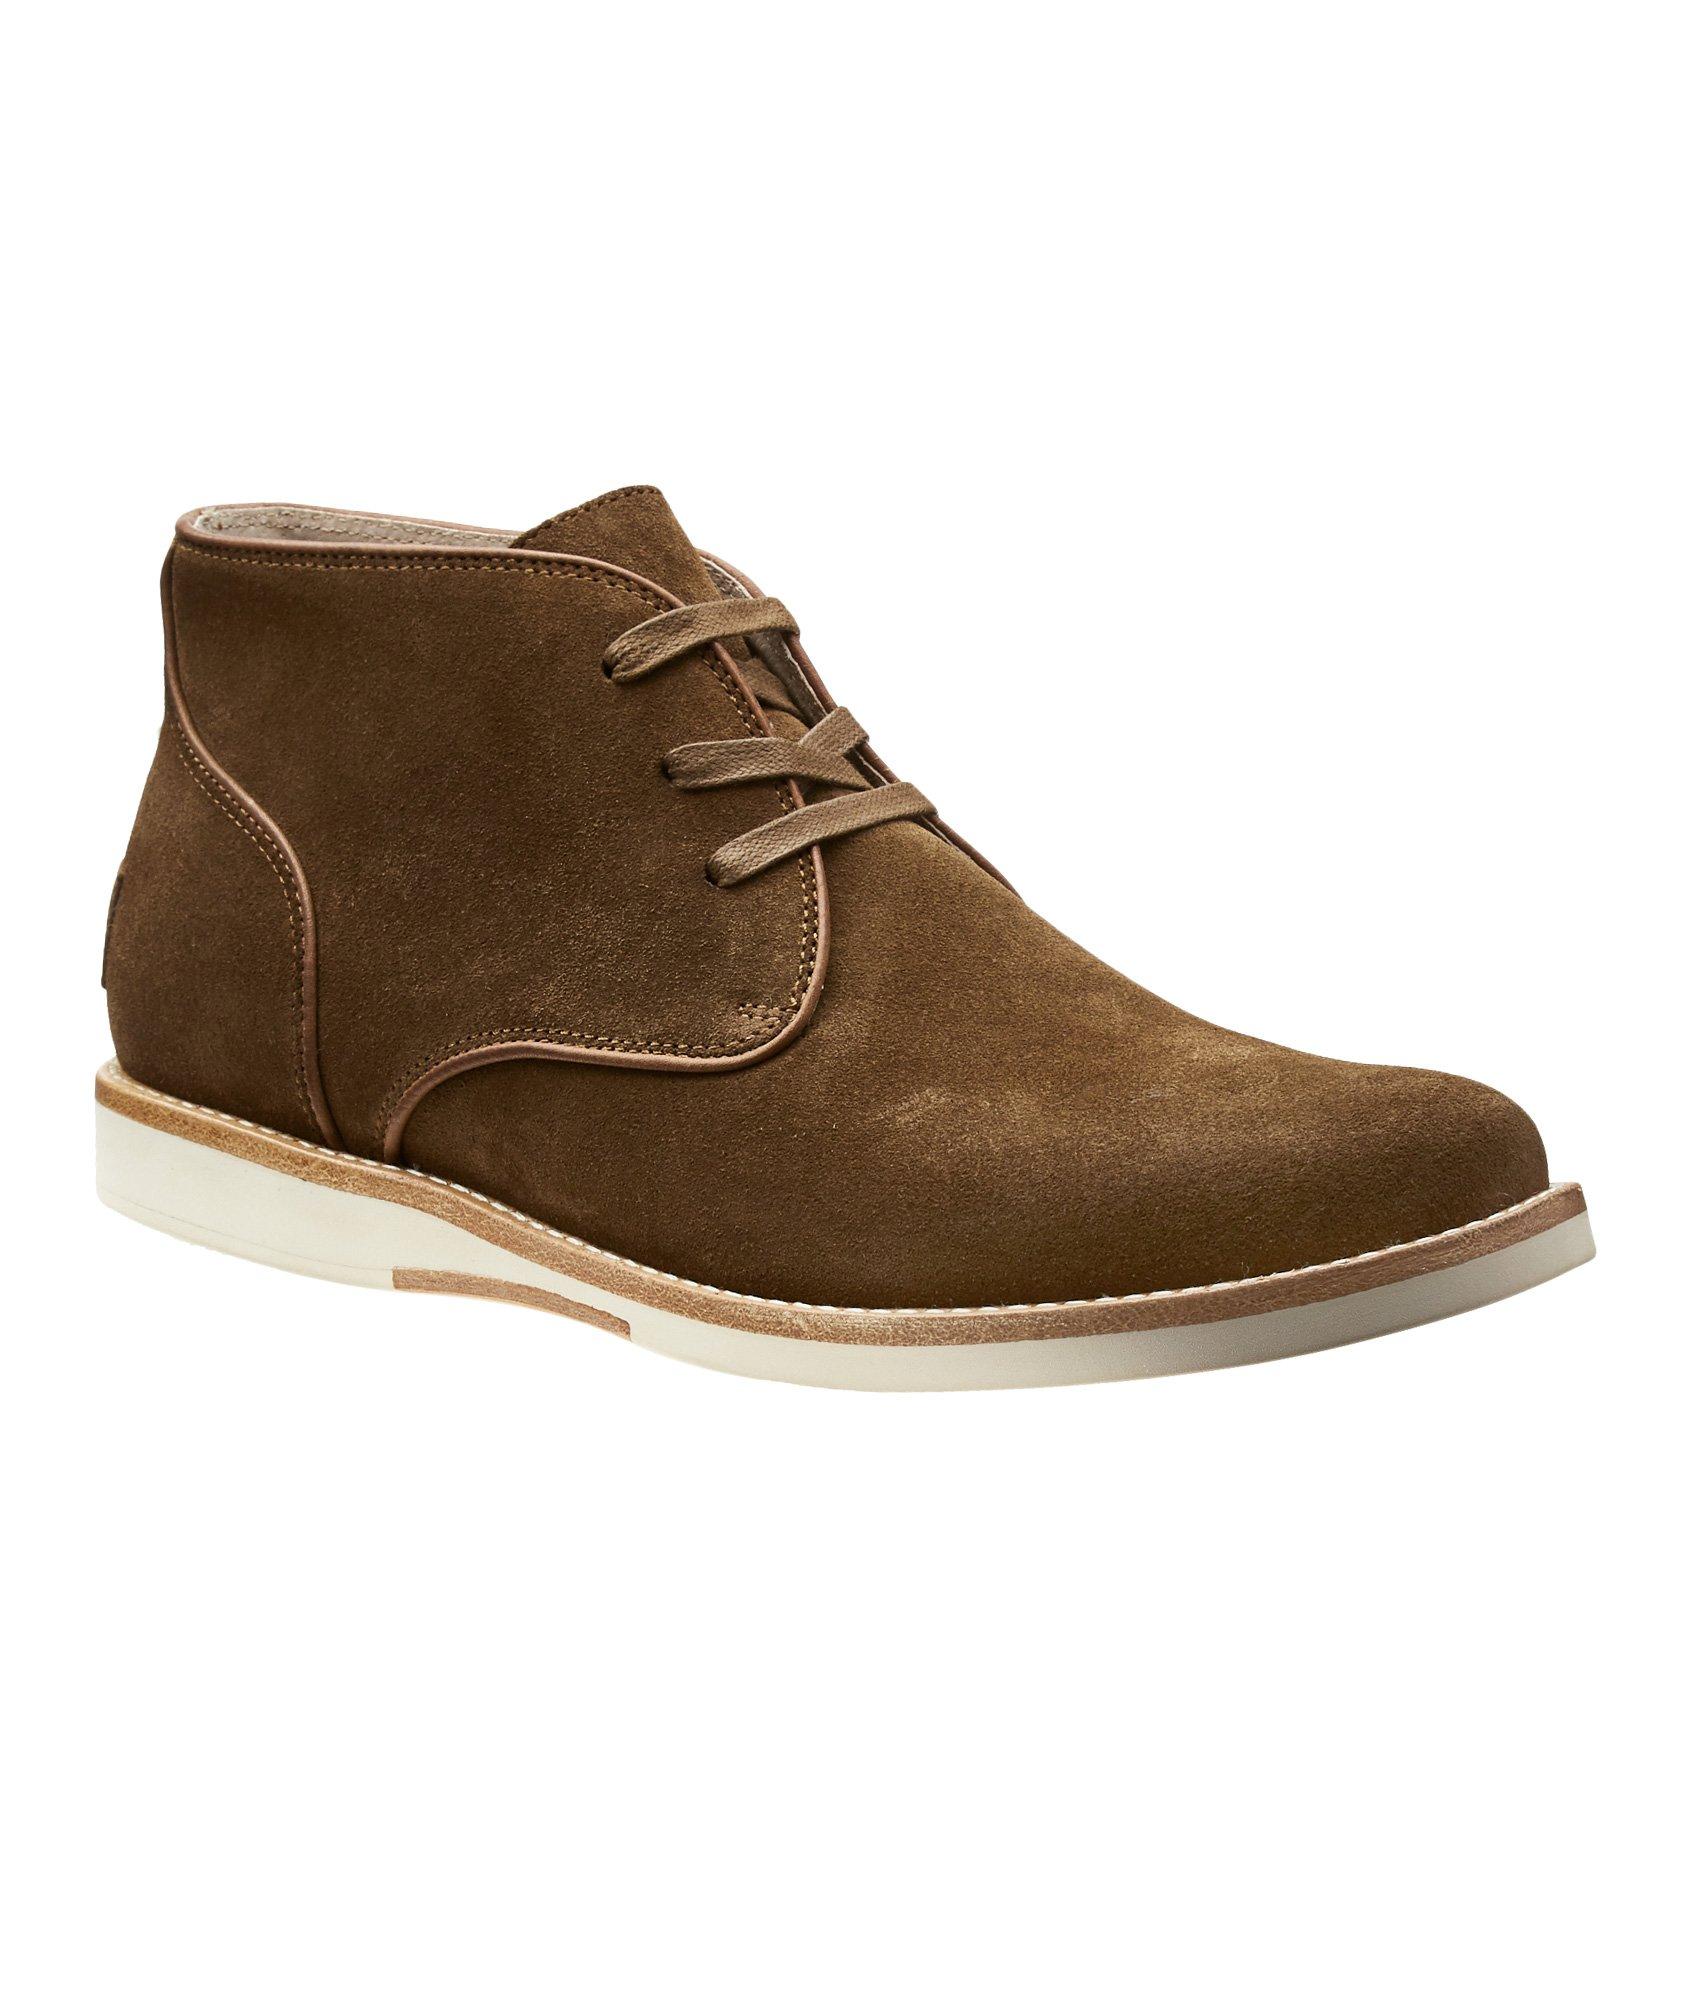 Suede Chukka Boots image 0